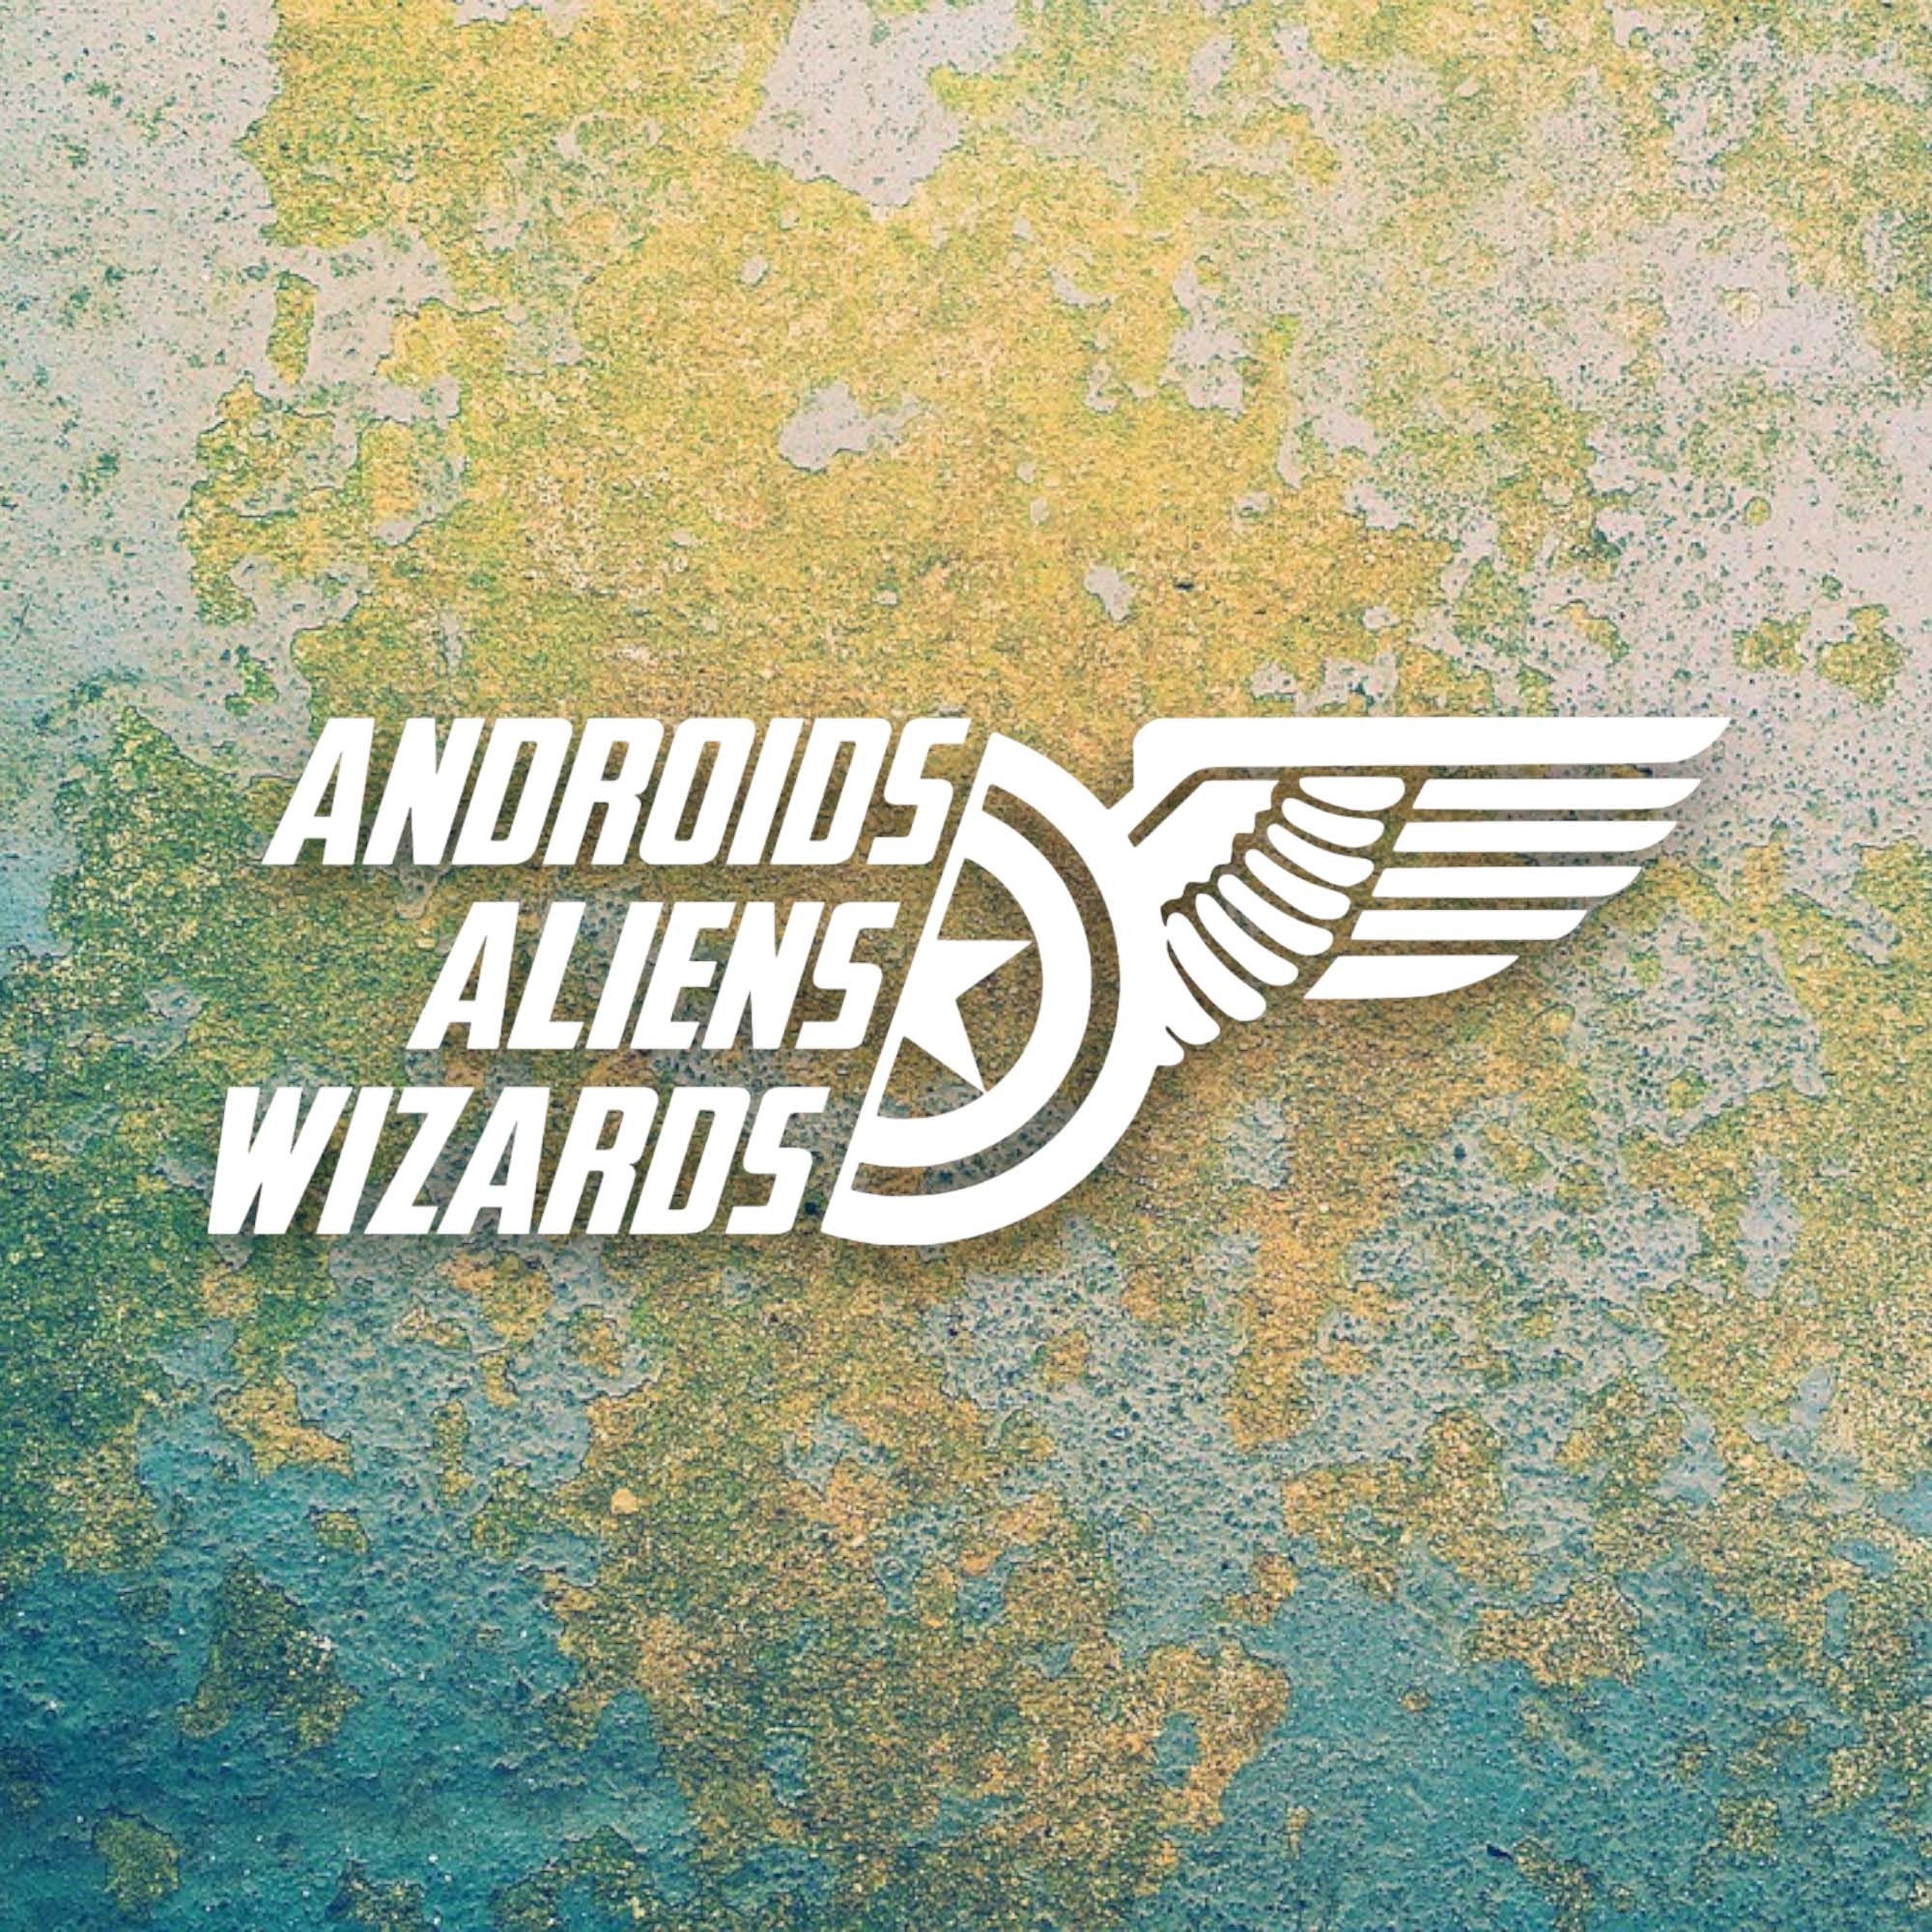 FATWS Big 3 Androids Aliens Wizards Decal in White or Black